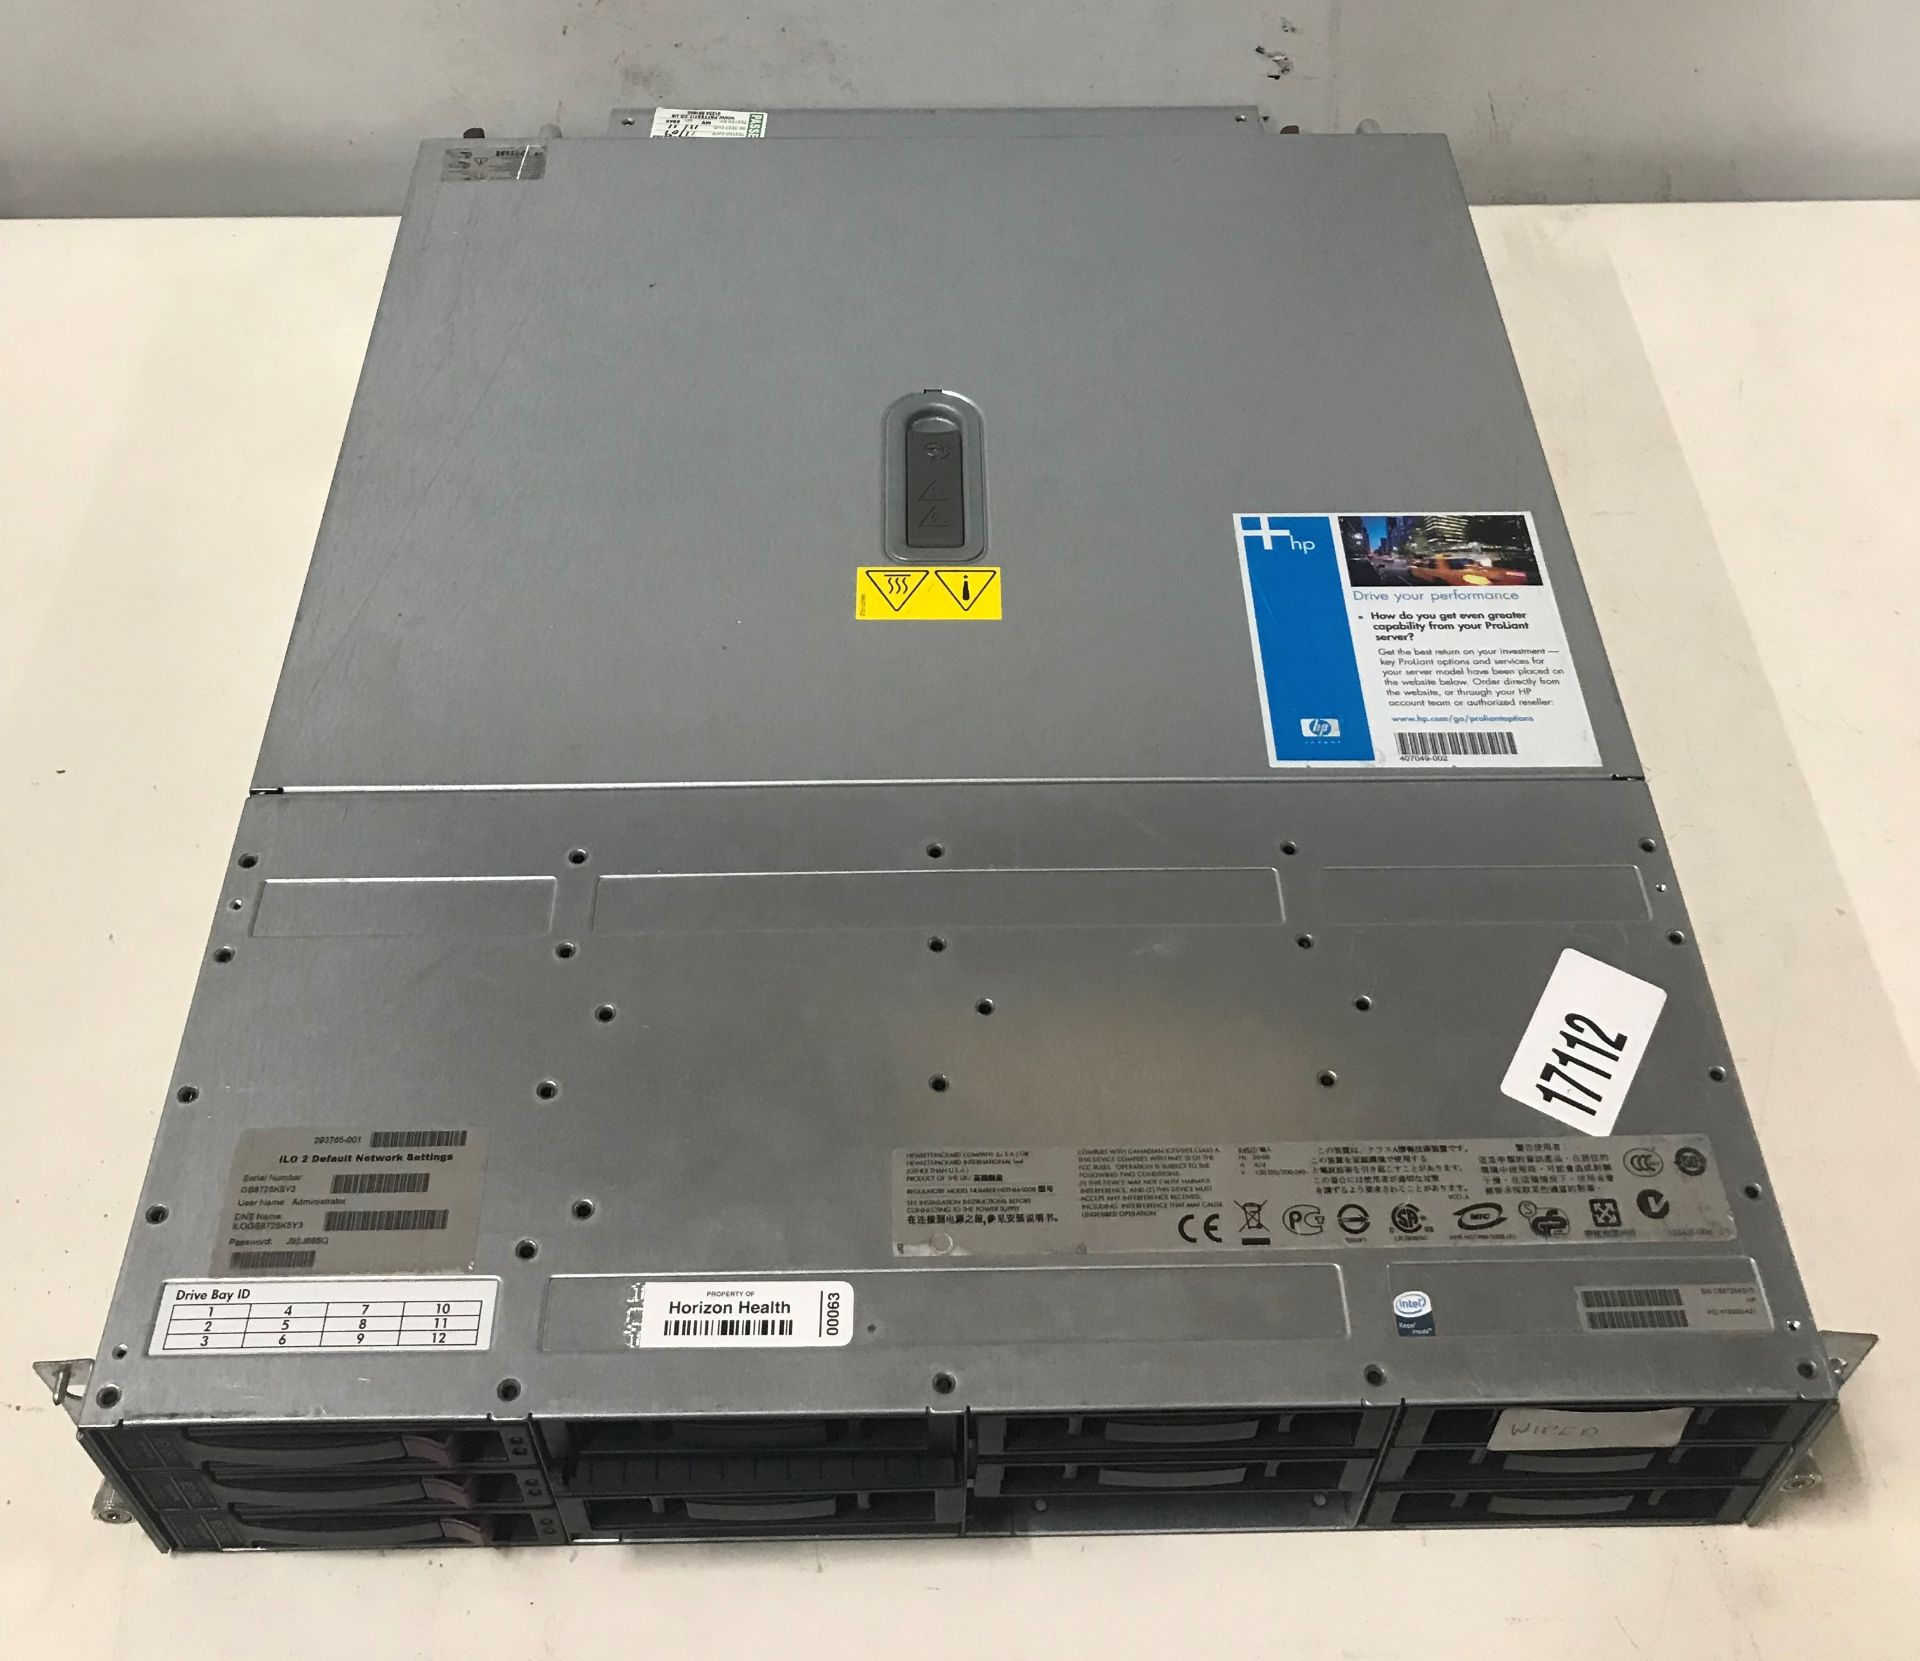 HP Server Unit with 3 x 160GB HDD